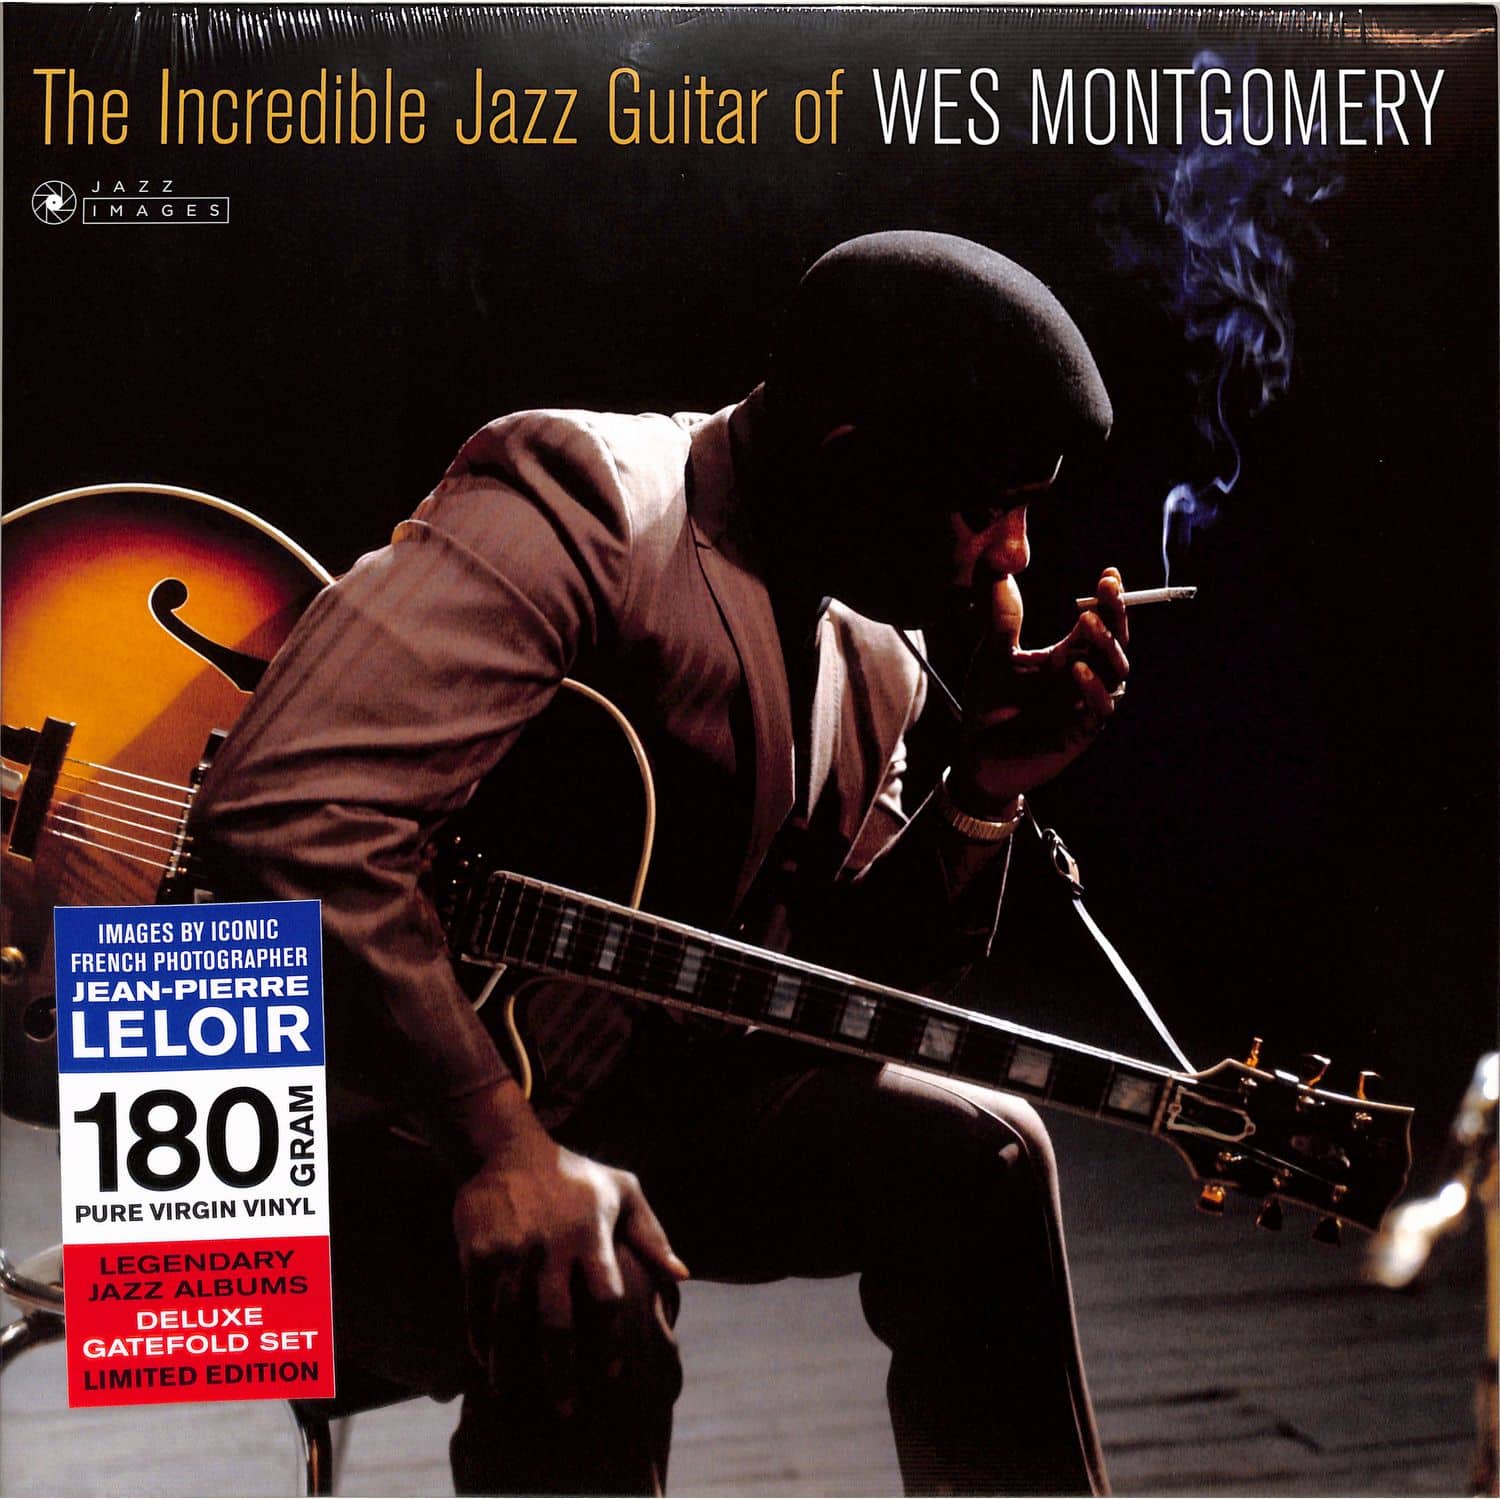 Wes Montgomery - THE INCREDIBLE JAZZ GUITAR 